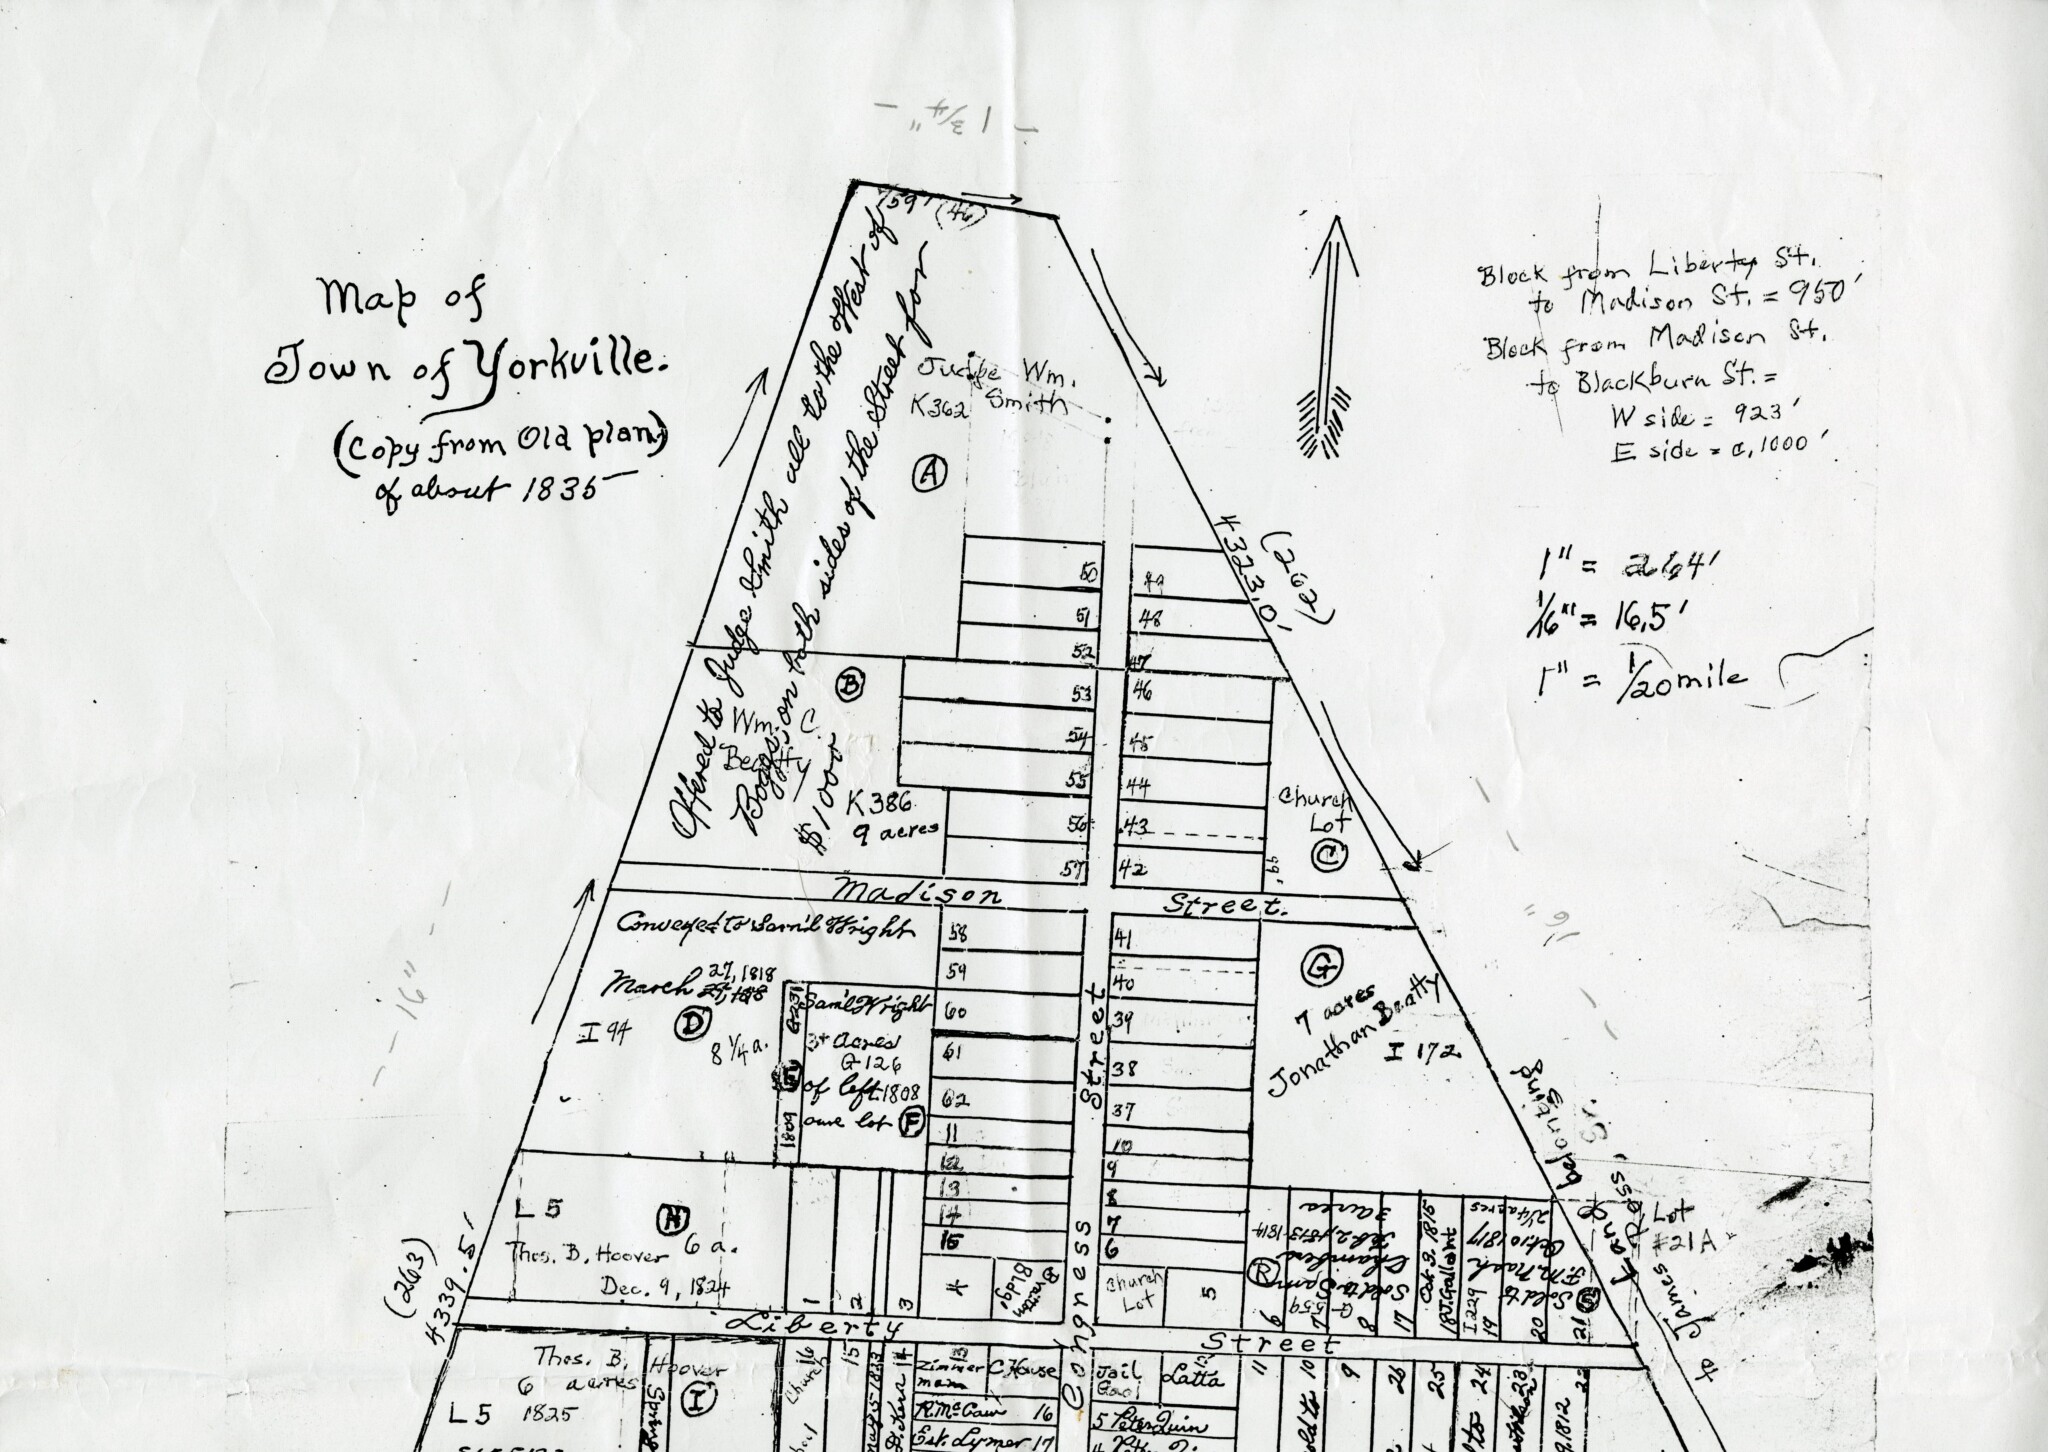 MAP OF YORKVILLE SC - WM. B. WHITE, JR. COLLECTION, P. 1